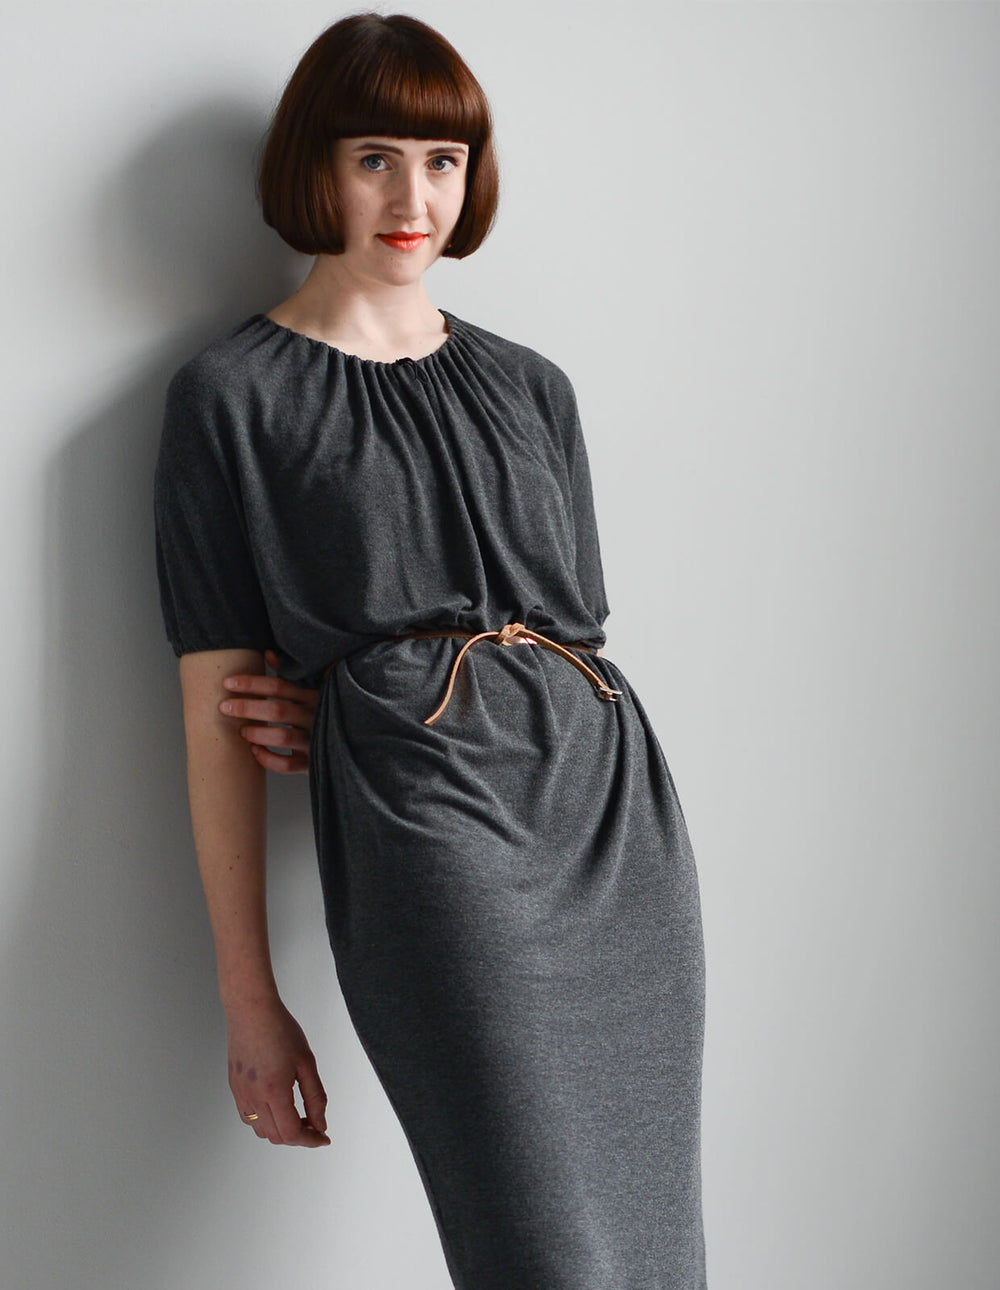 Woman wearing the Drawstring-neck Dress sewing pattern from The Maker's Atelier on The Fold Line. A dress pattern made in fluid drapey fabrics, woven or jersey, viscose mixes, silks and crepes fabrics, featuring a relaxed fit, grown on short sleeves with 